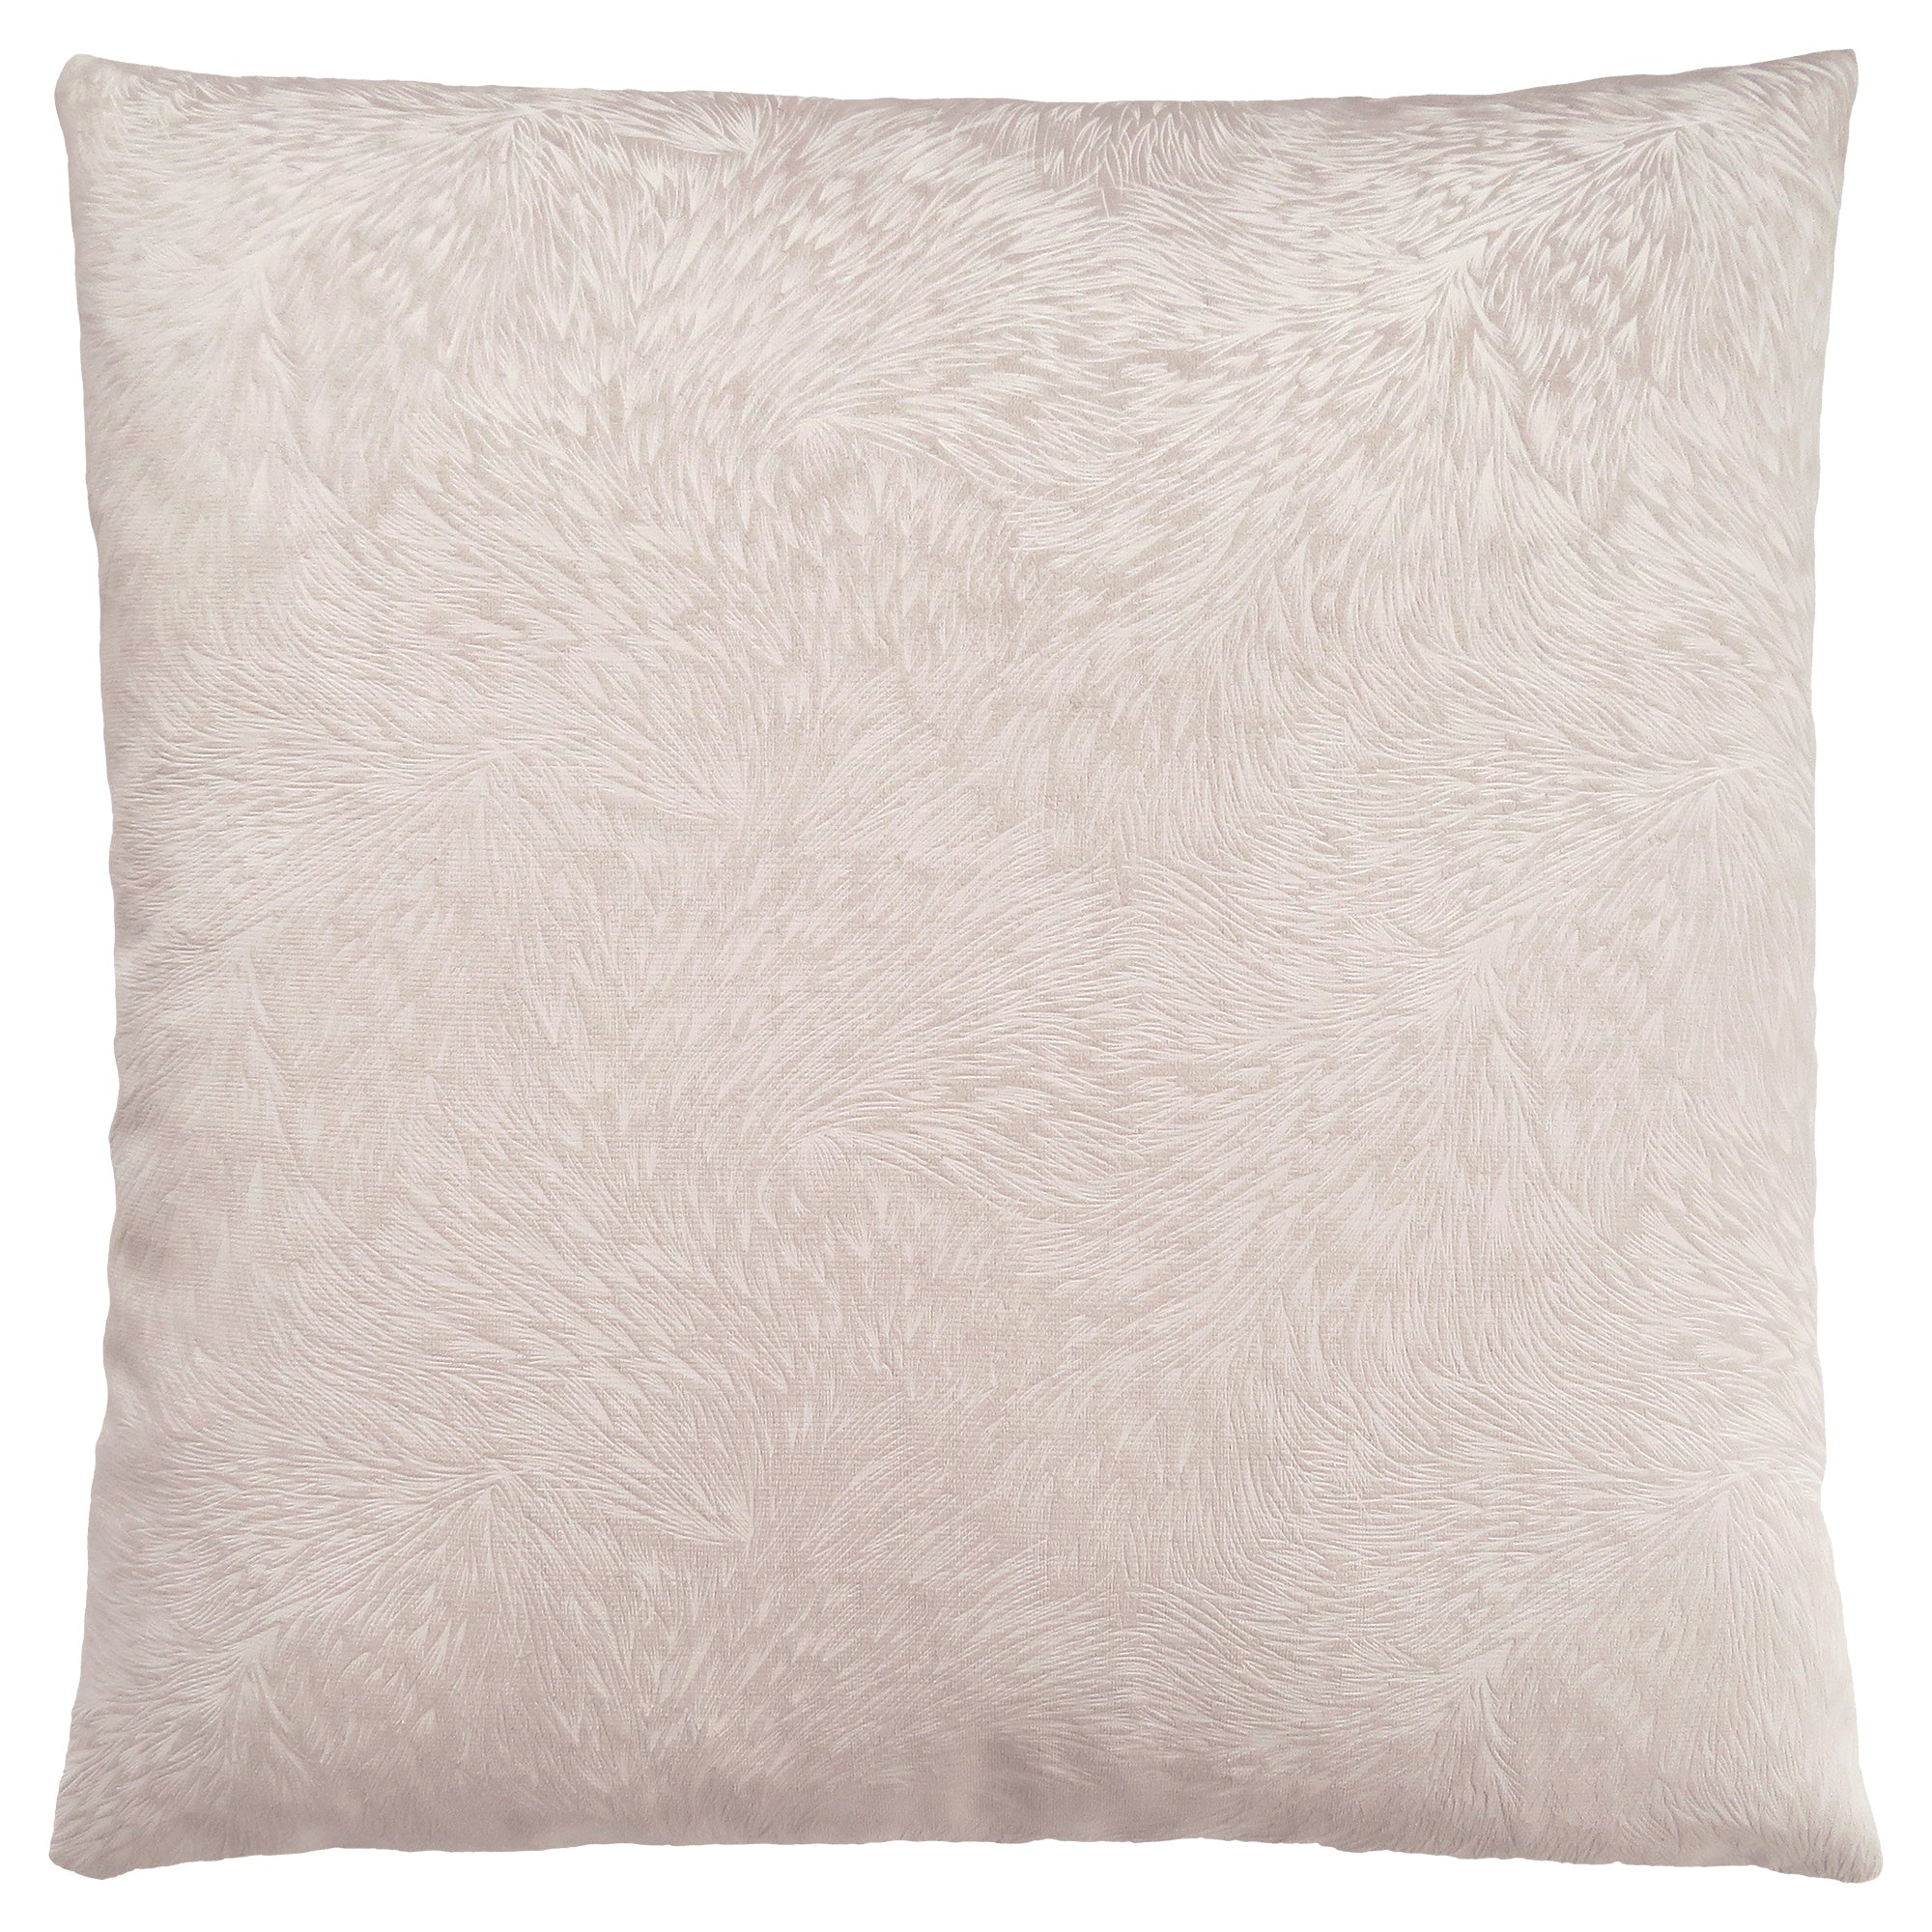 Pillow - 18X 18 / Light Taupe Feathered Velvet / 1Pc